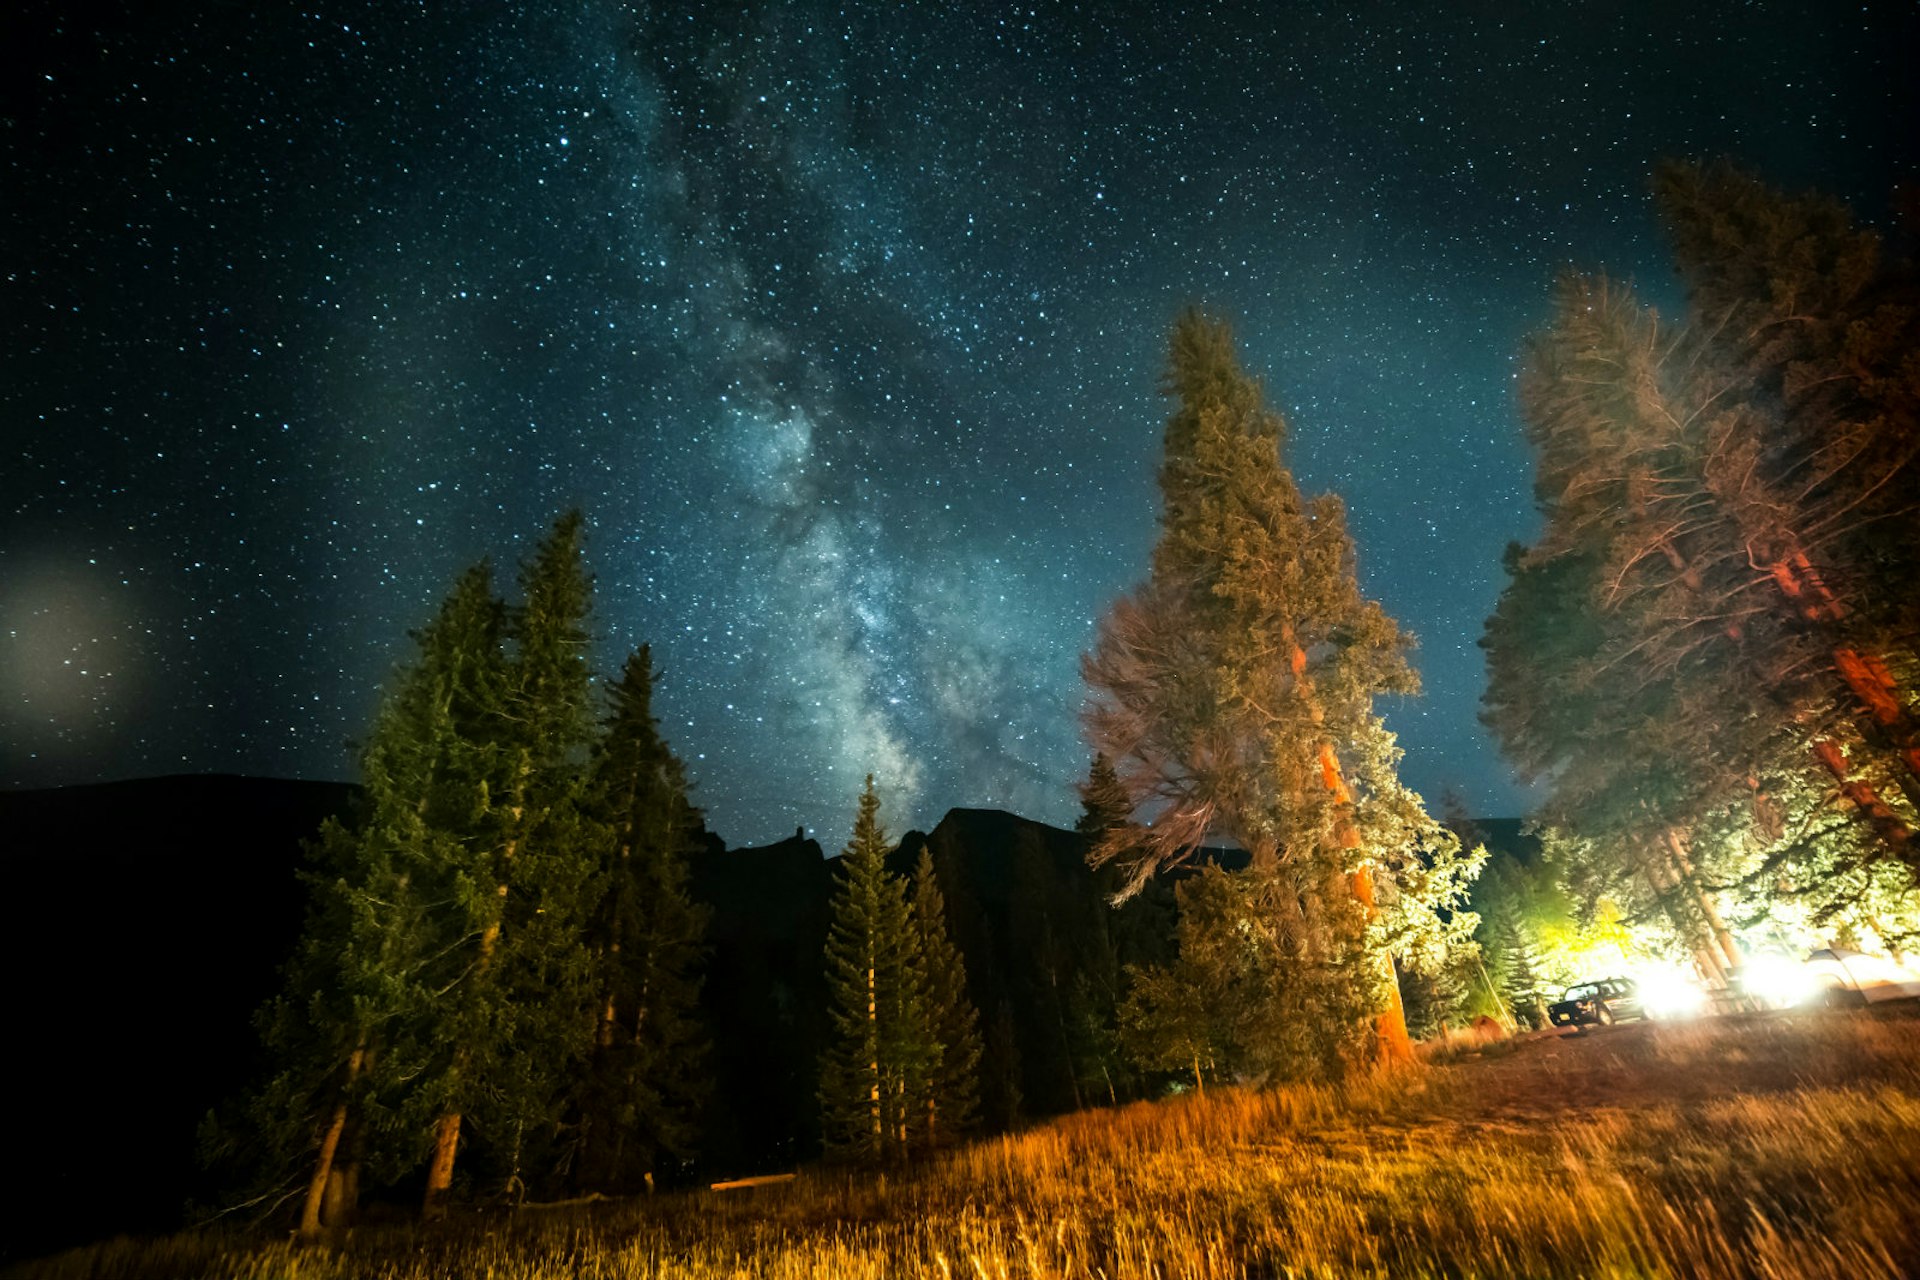 The milky way is seen clearly rising above some trees; National Parks: The best free things to do in the US parks